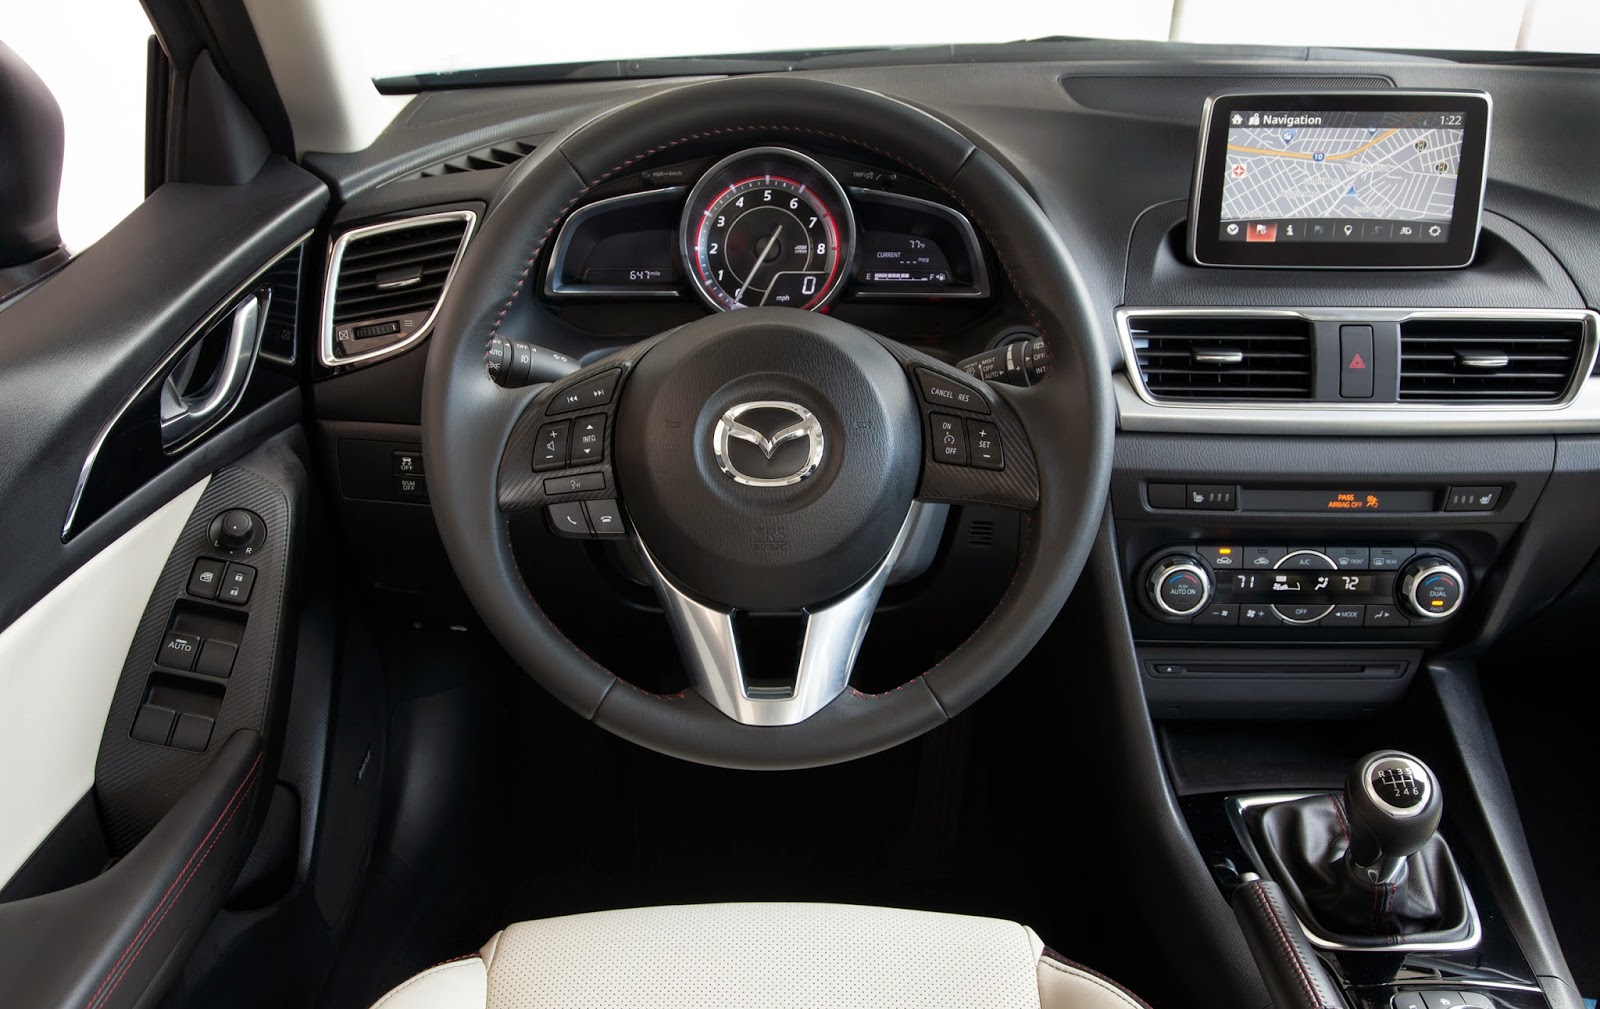 Gimme Five The 2015 Mazda 3 S 5 Door Grand Touring